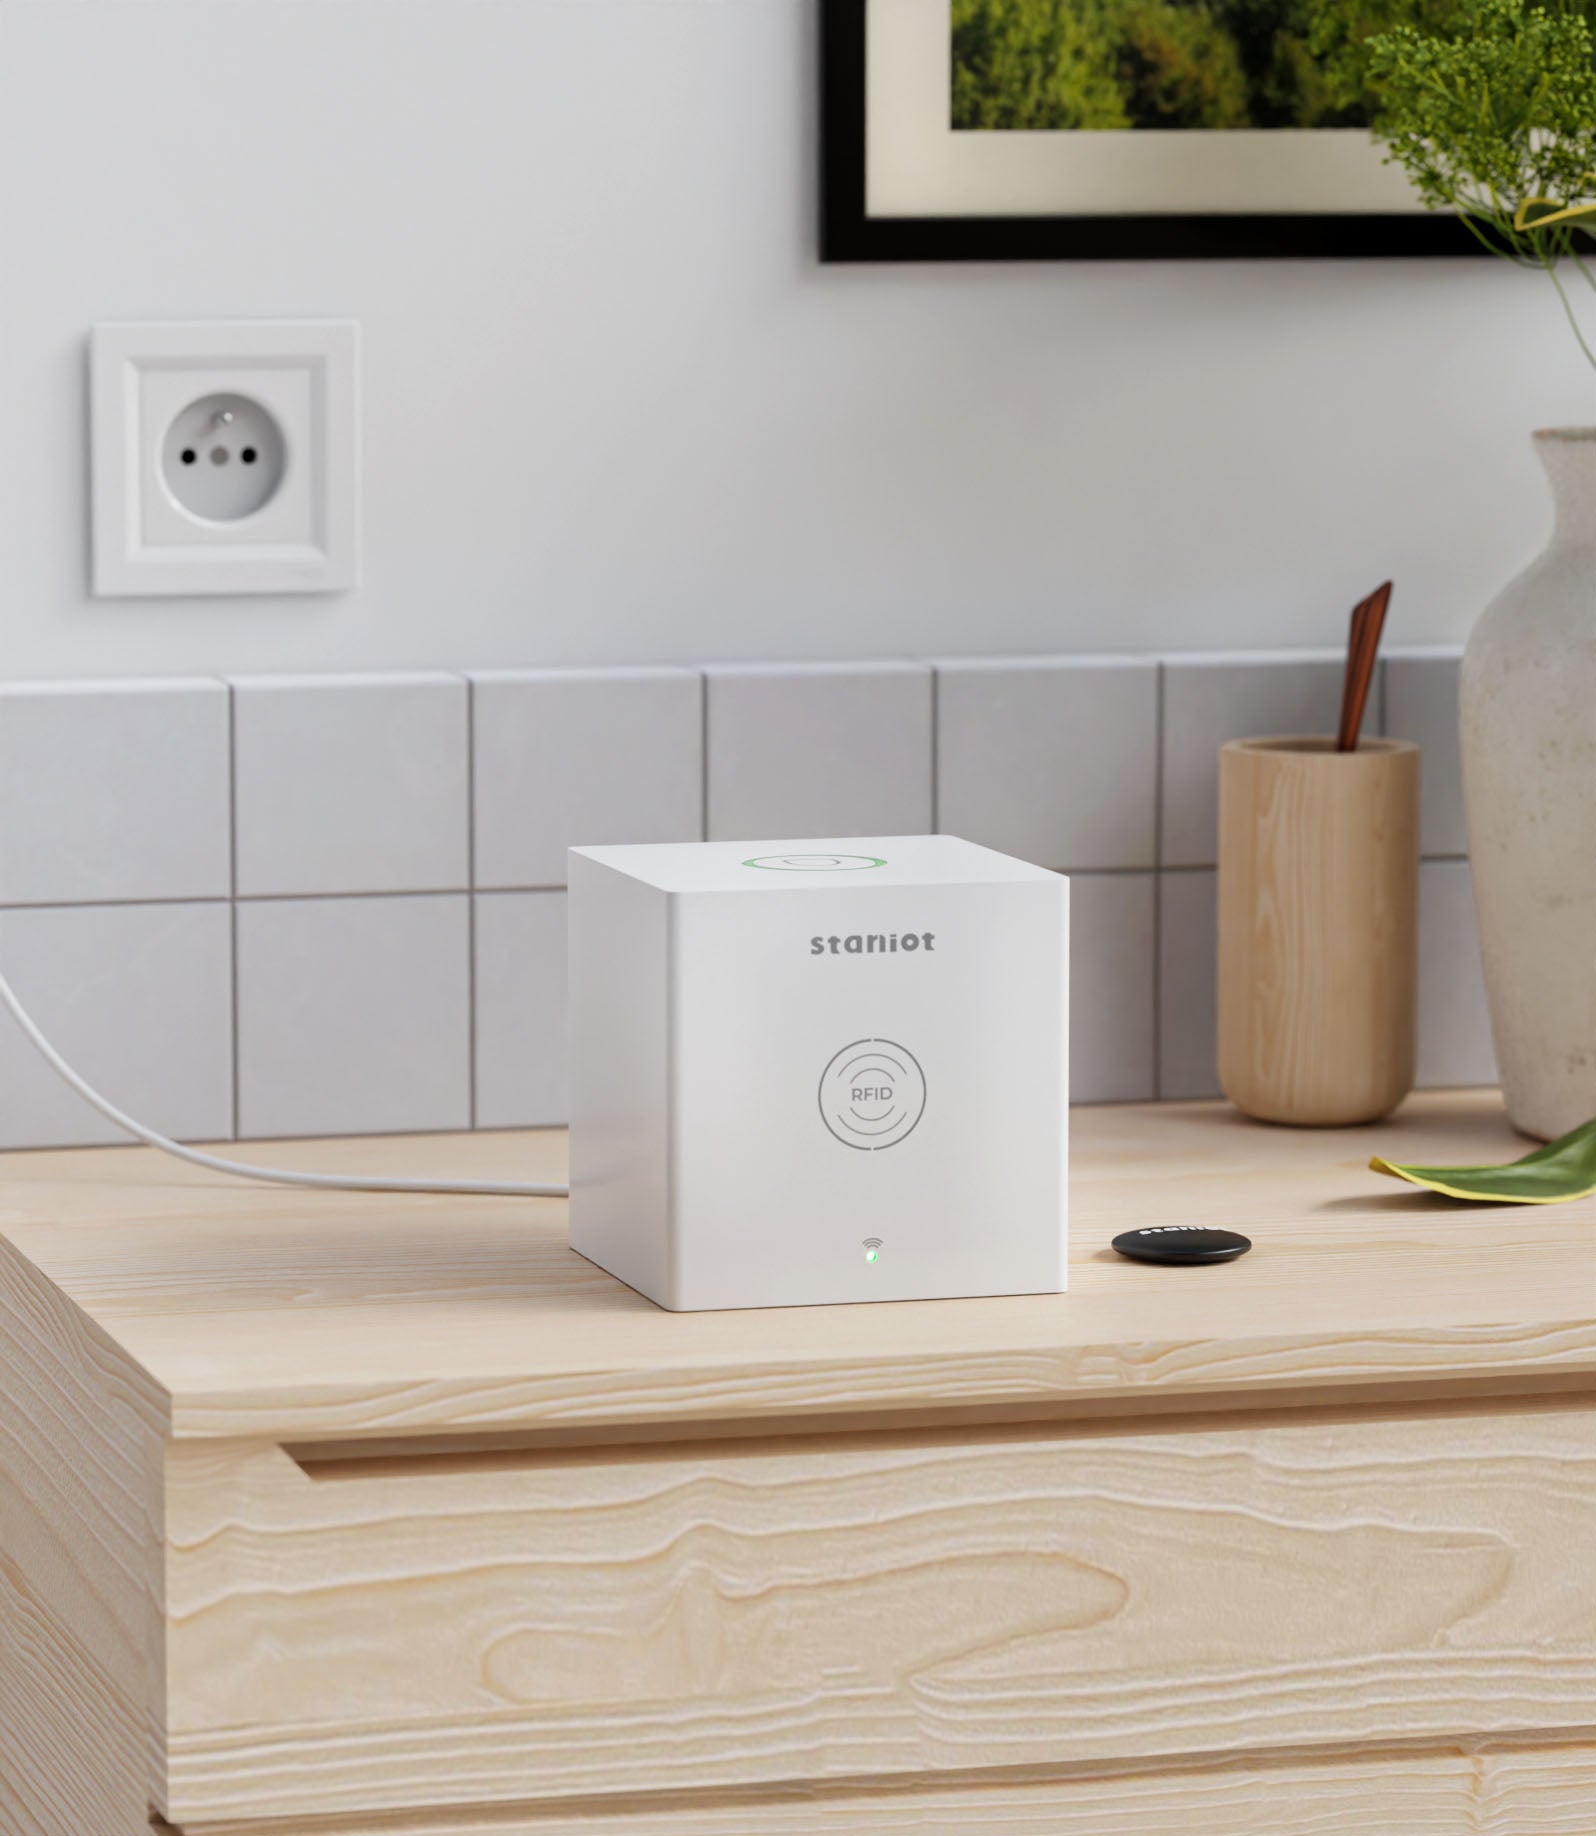 Sec-cube-3-modern-diy-white-alarm-box-with-rfid-key-placed-on-scandinavian-kitchen-table-top